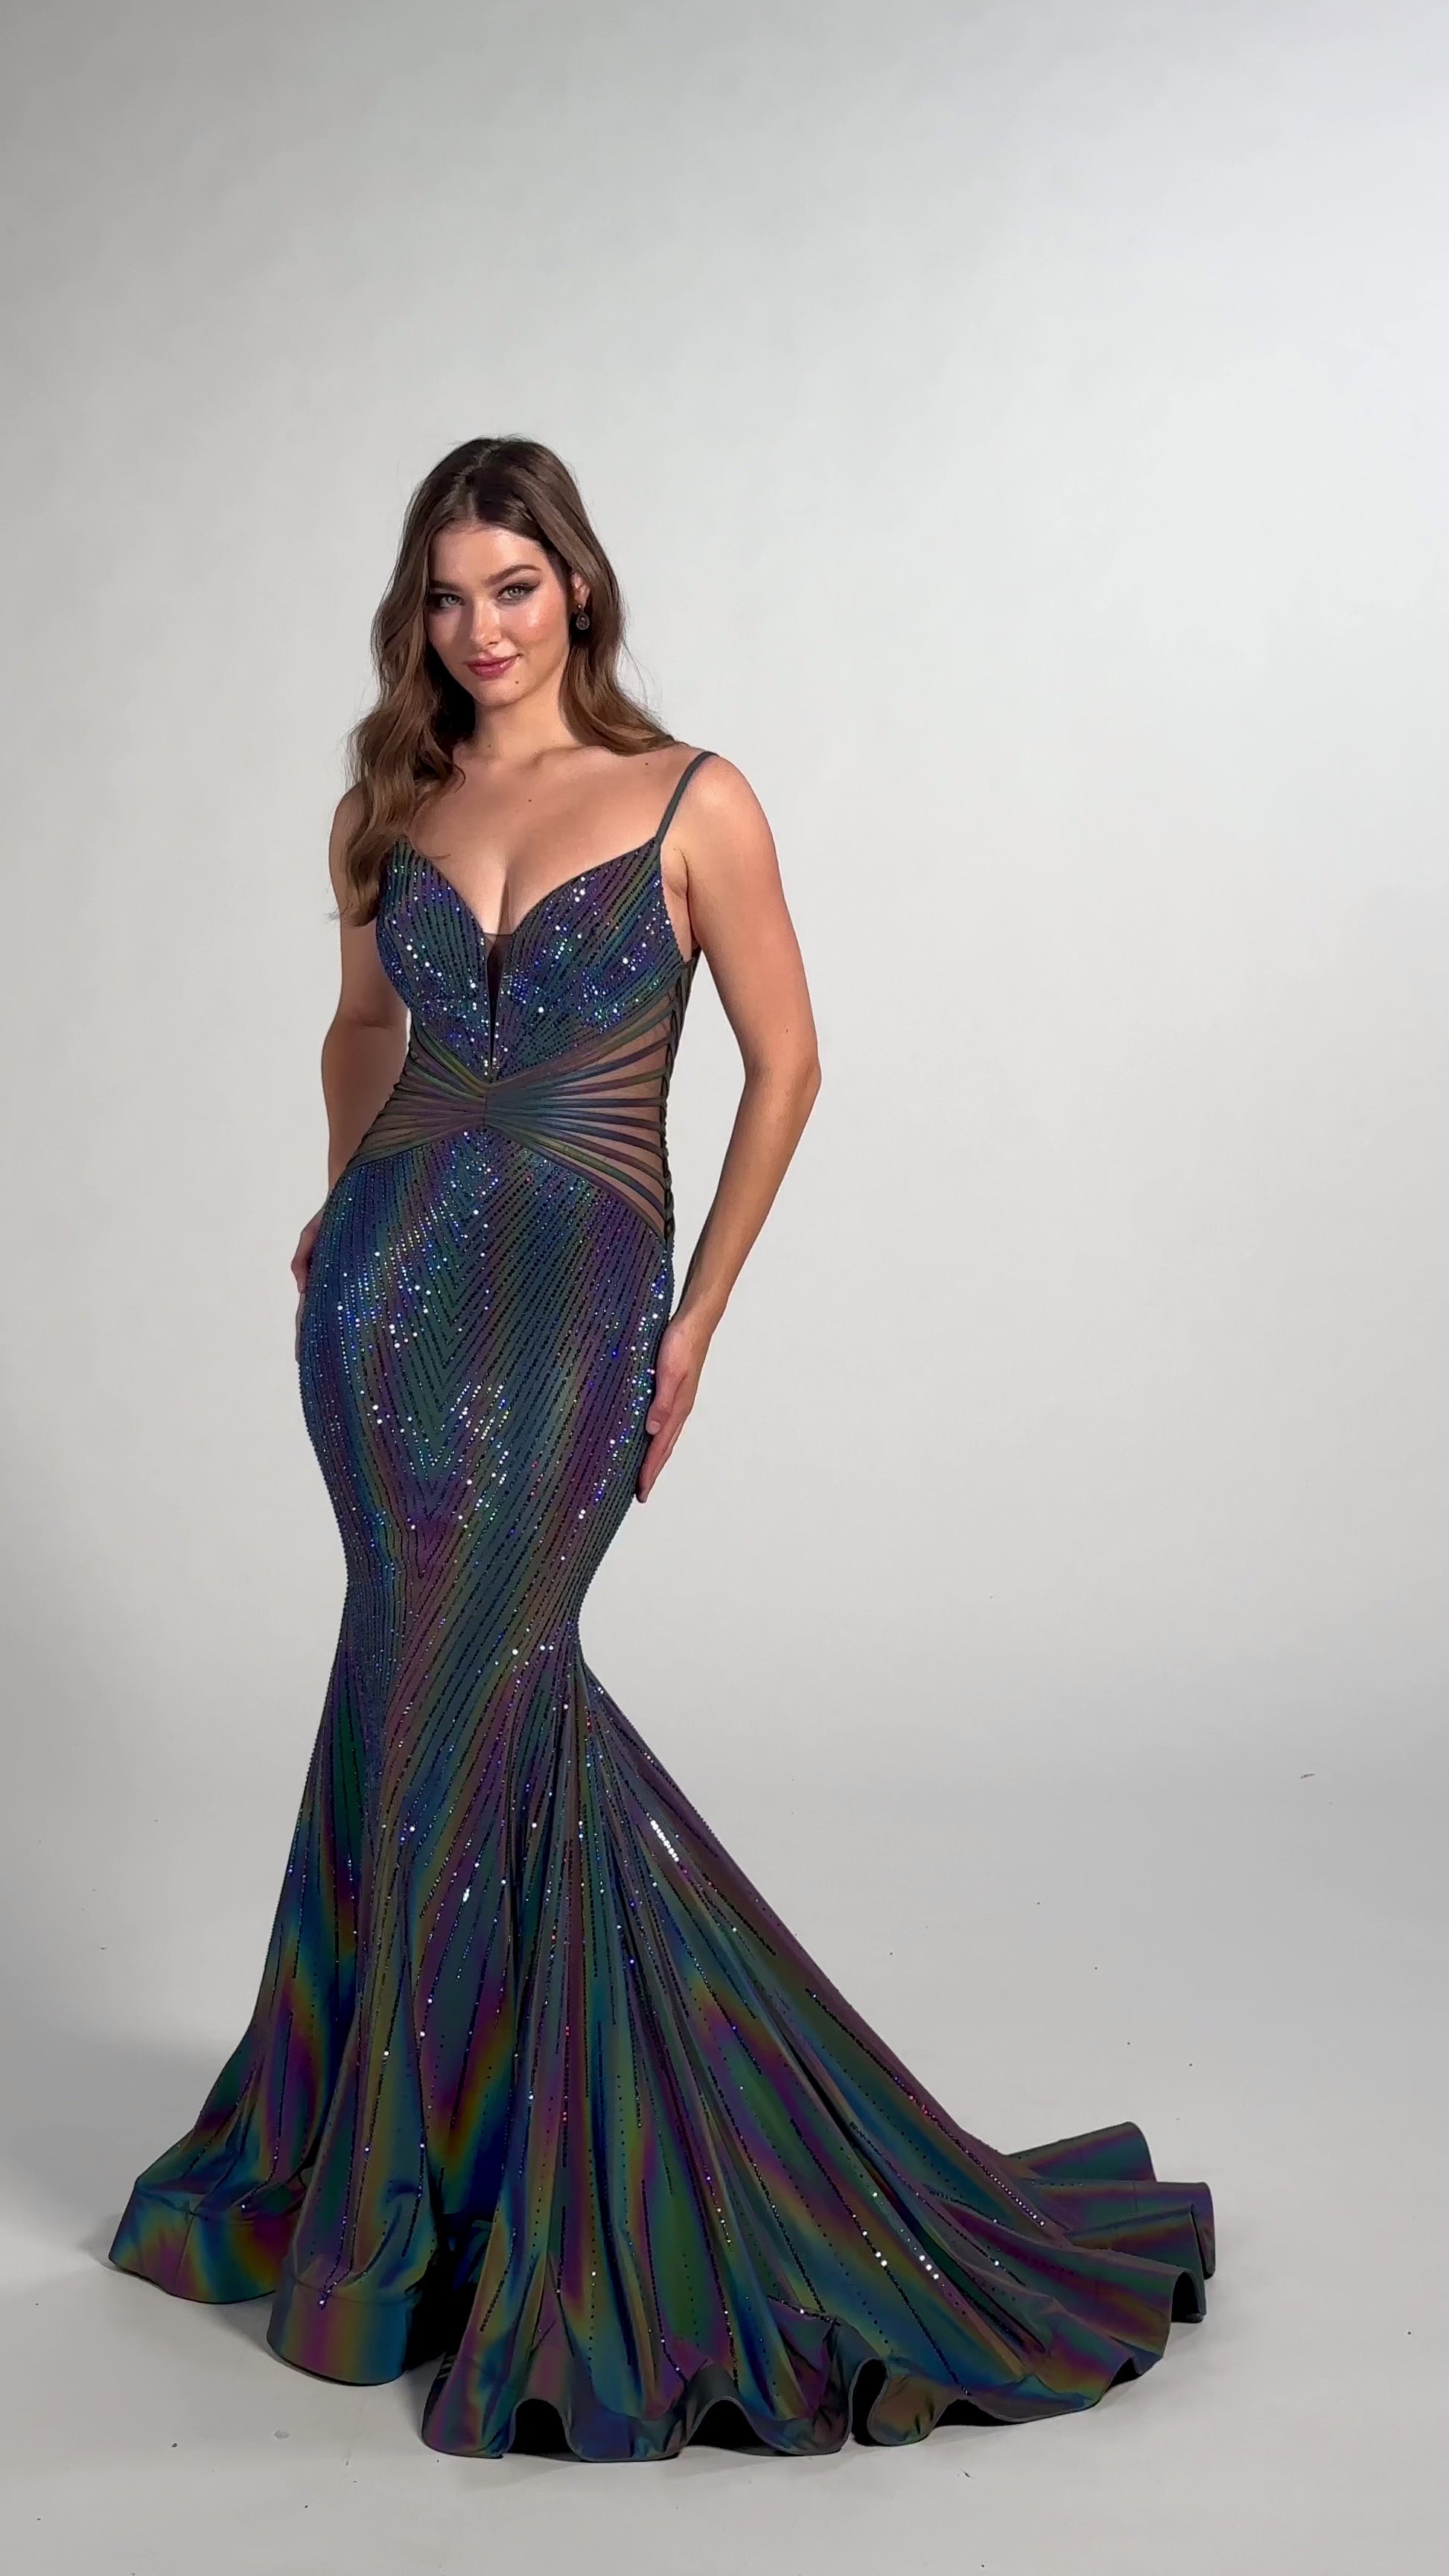 The Ellie Wilde EW35704 Prom Dress is a show-stopping style perfect for any special occasion. Featuring a long, fitted SUPERNOVA mermaid silhouette, sheer bodice with boning, this holographic gown is sure to turn heads. A unique style for a memorable night.   Sizes: 00-24  Colors: SUPERNOVA